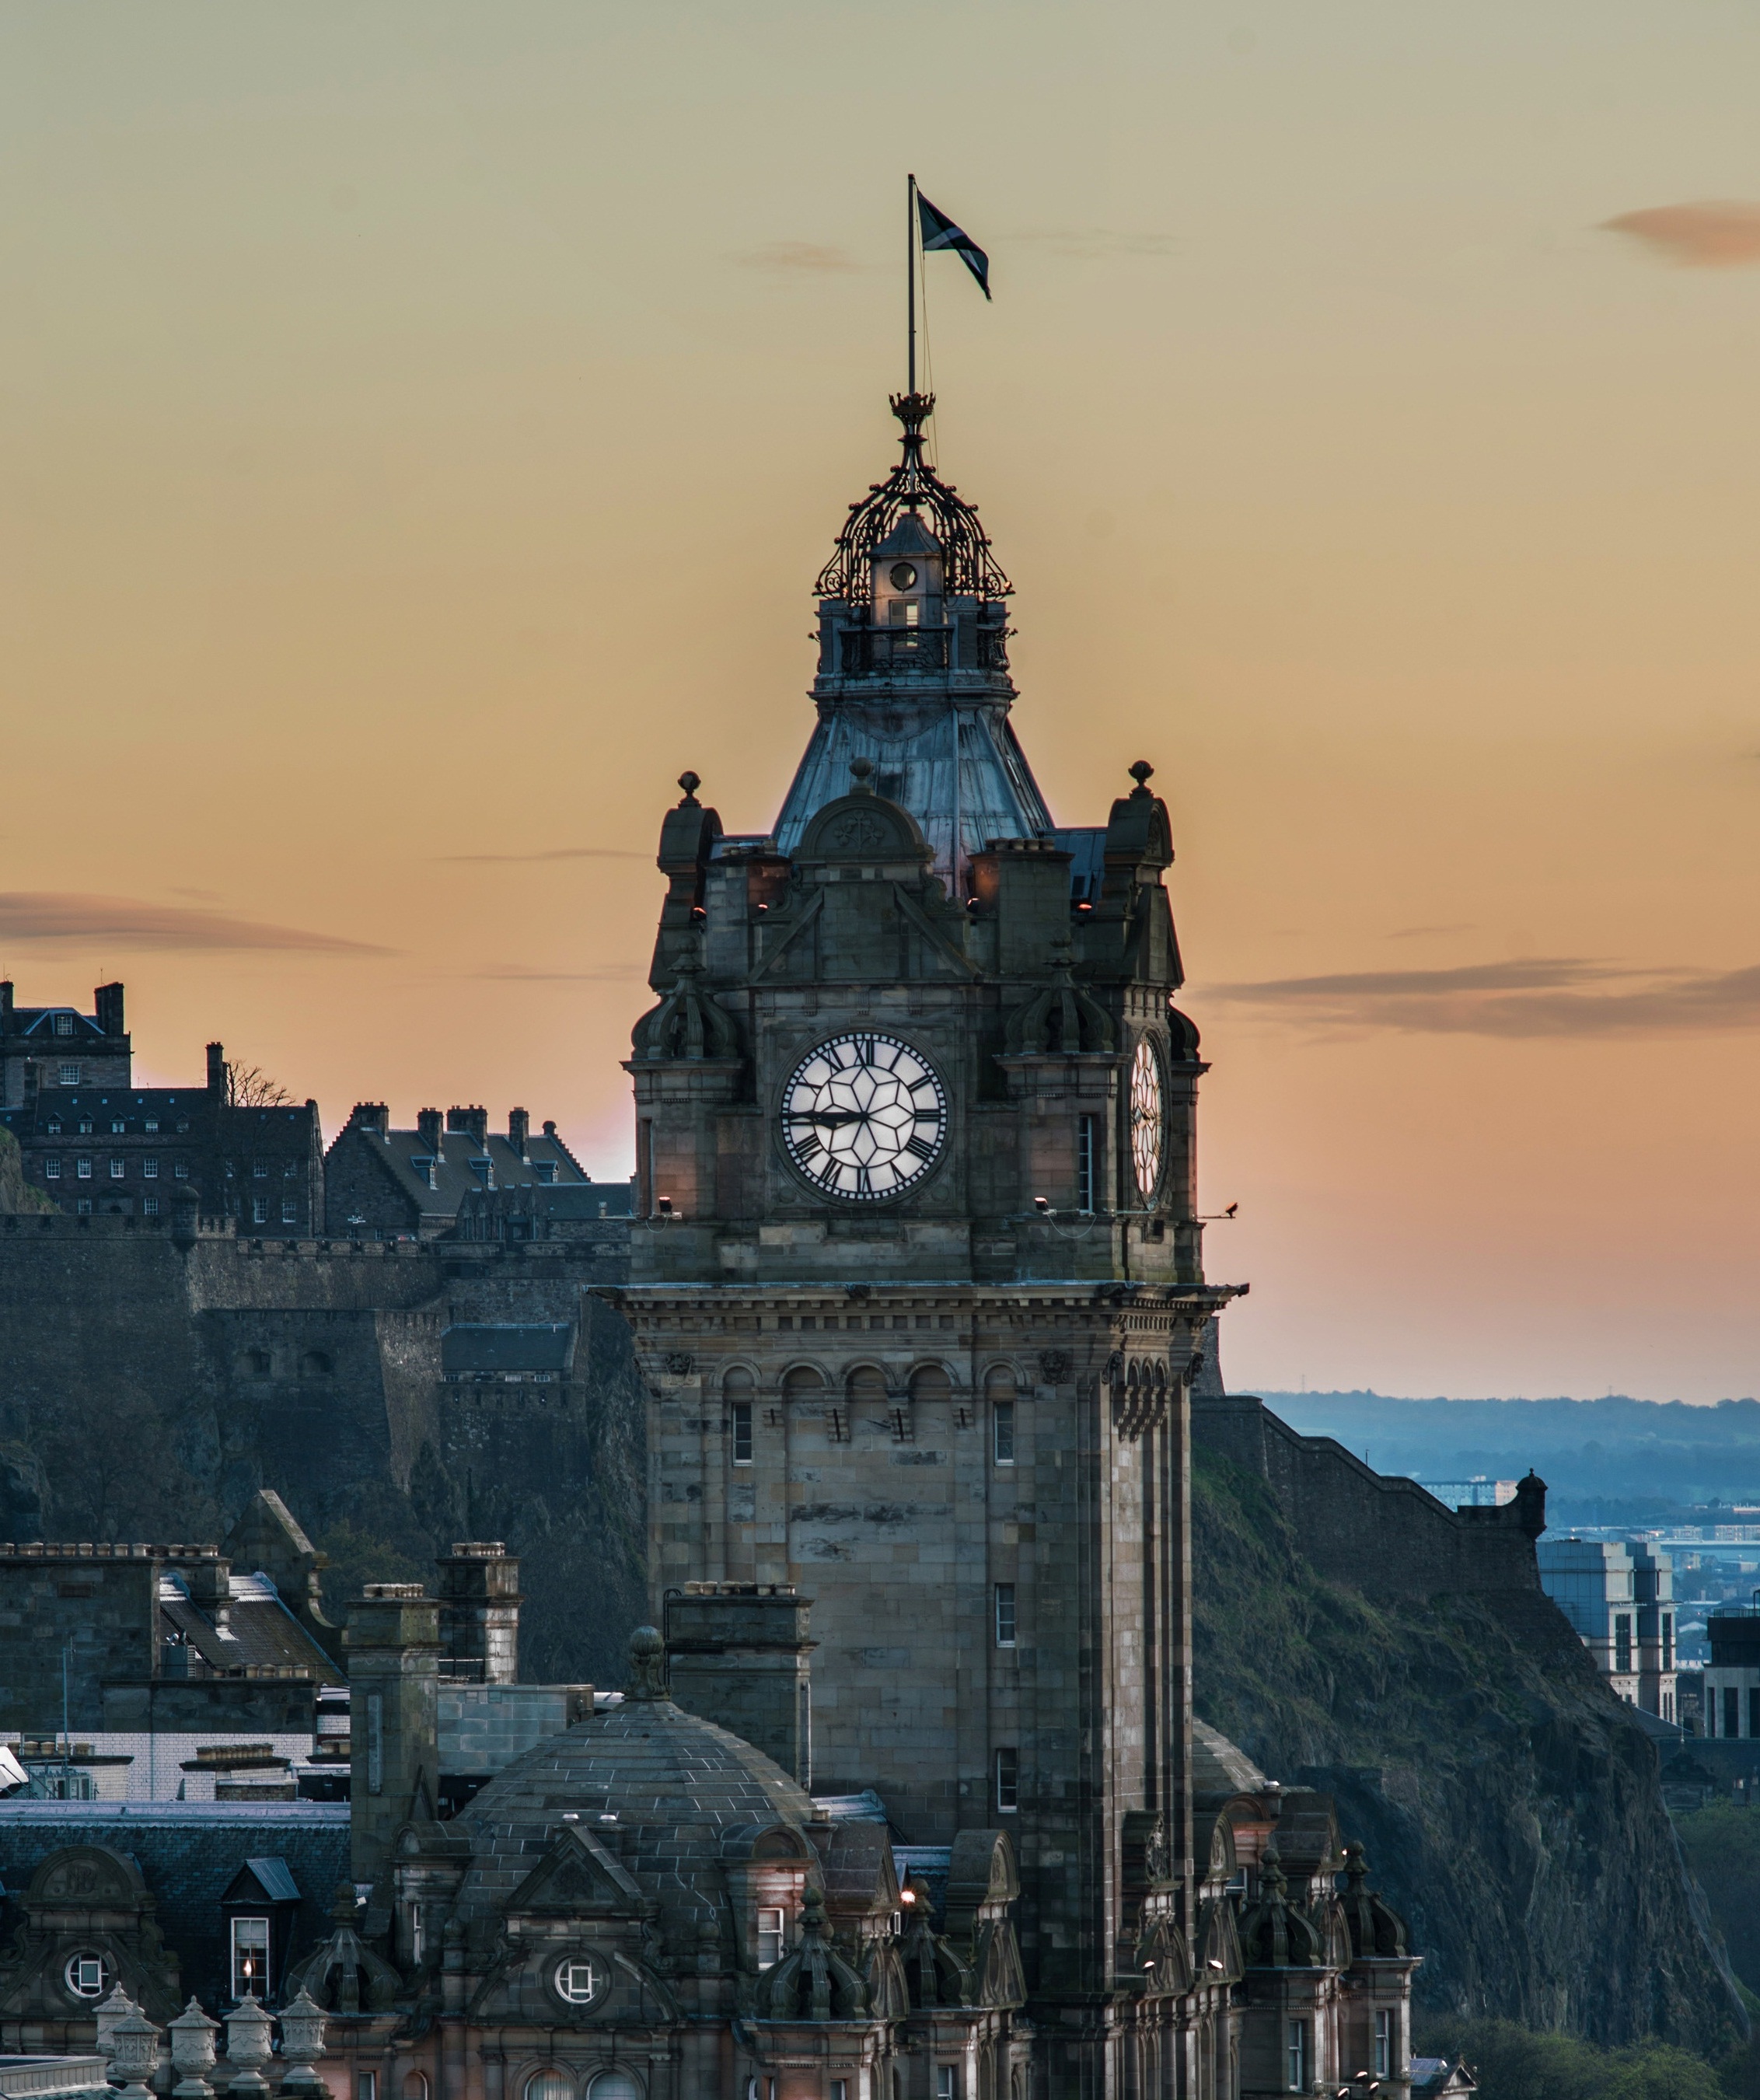 The Balmoral clock tower - set three minutes fast so you don't miss your train/Photo: Rocco Forte Hotels